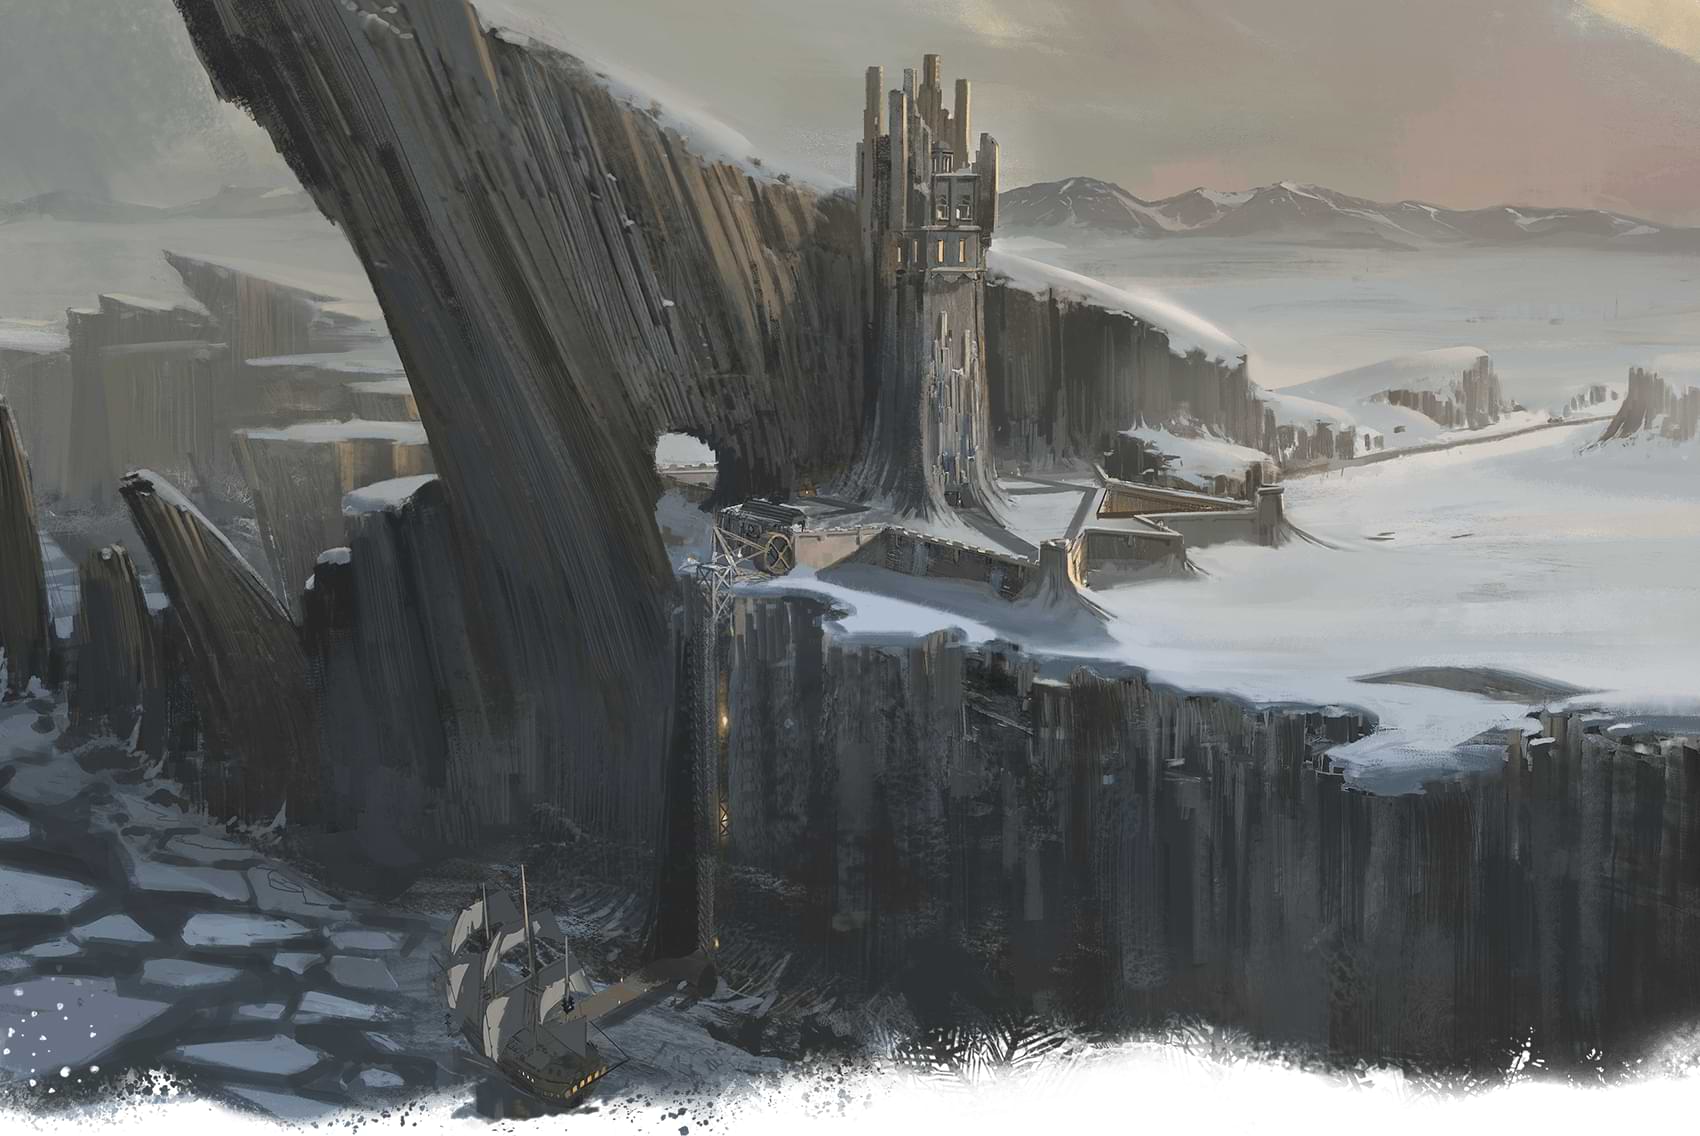 Revel's End. A stone prison surrounded by Tundra.